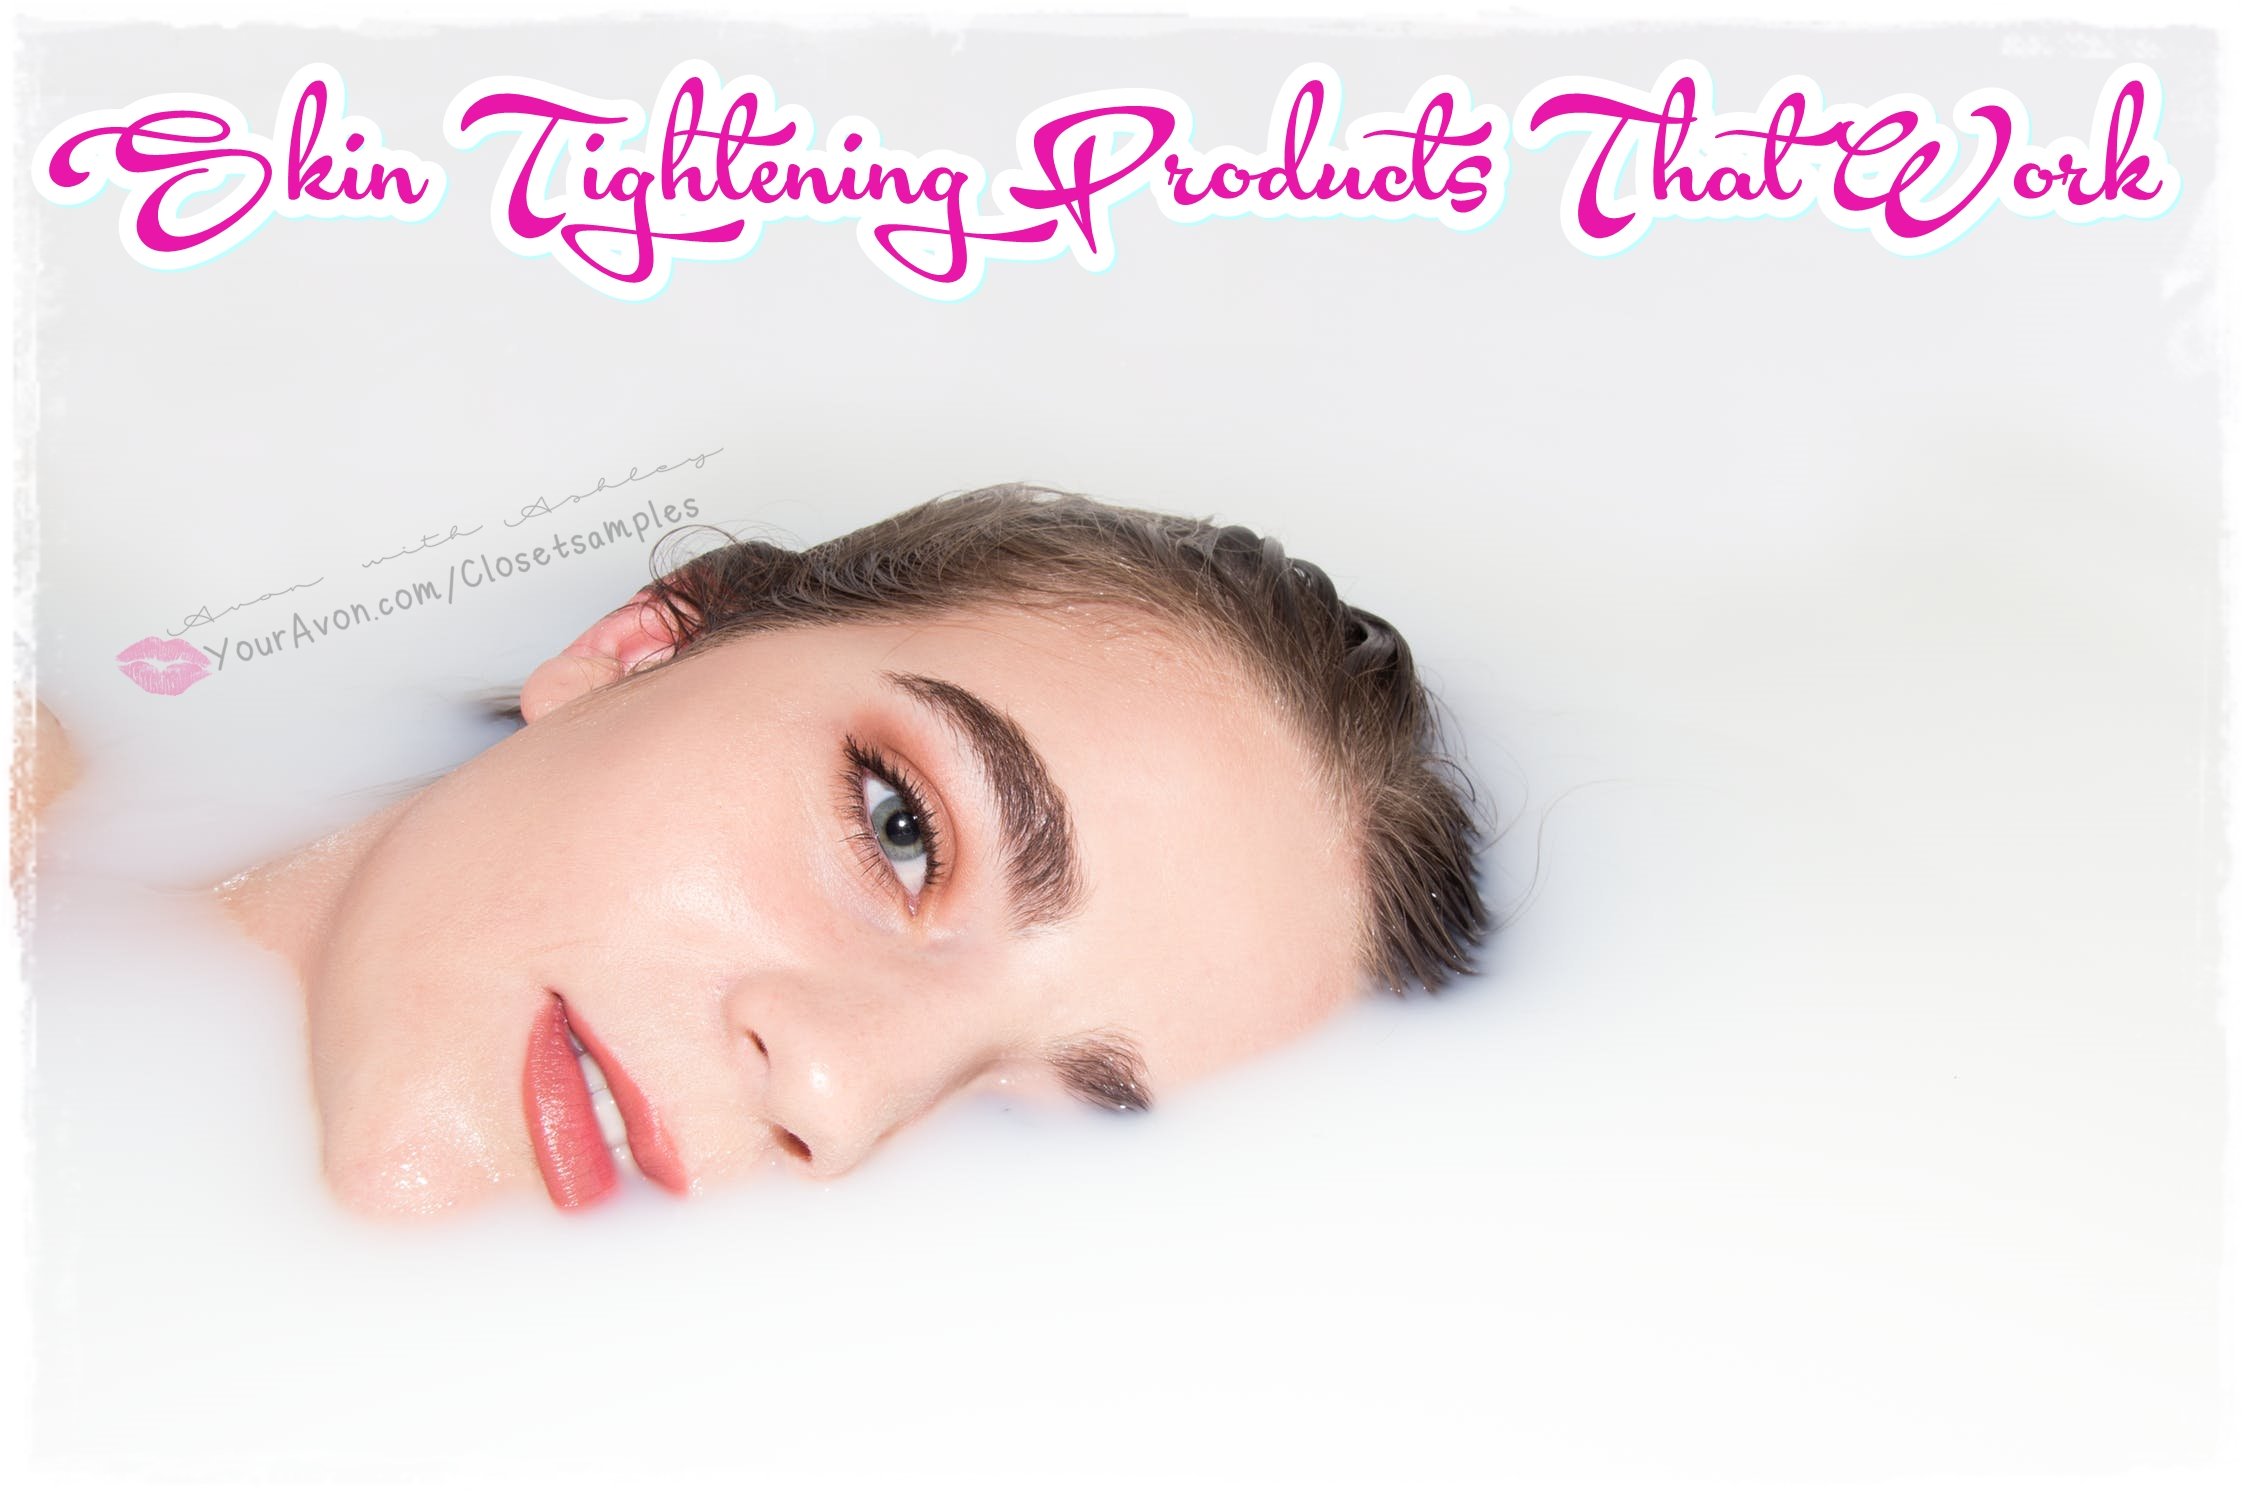 Skin Tightening Products That Work